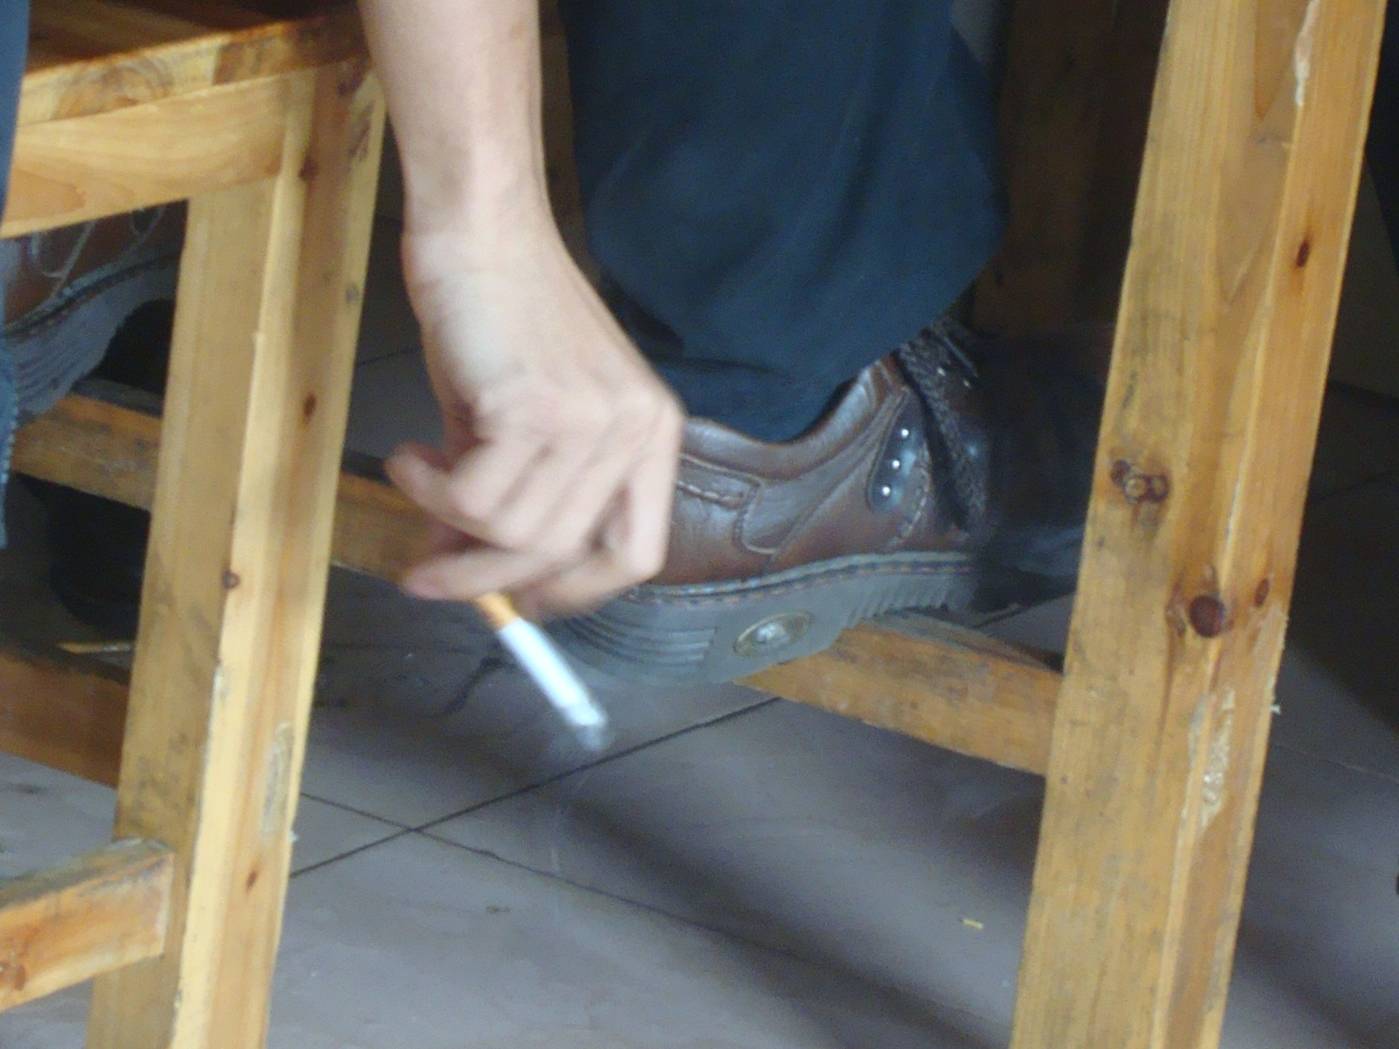 Picture: The world is their ashtray.  A smoker flicks his ash onto the restaurant floor.  We've seen them butt cigarettes out on carpets.  Often they just drop them to smolder and stink, not bothering to butt them out at all.  Haikou, Hainan Island, China